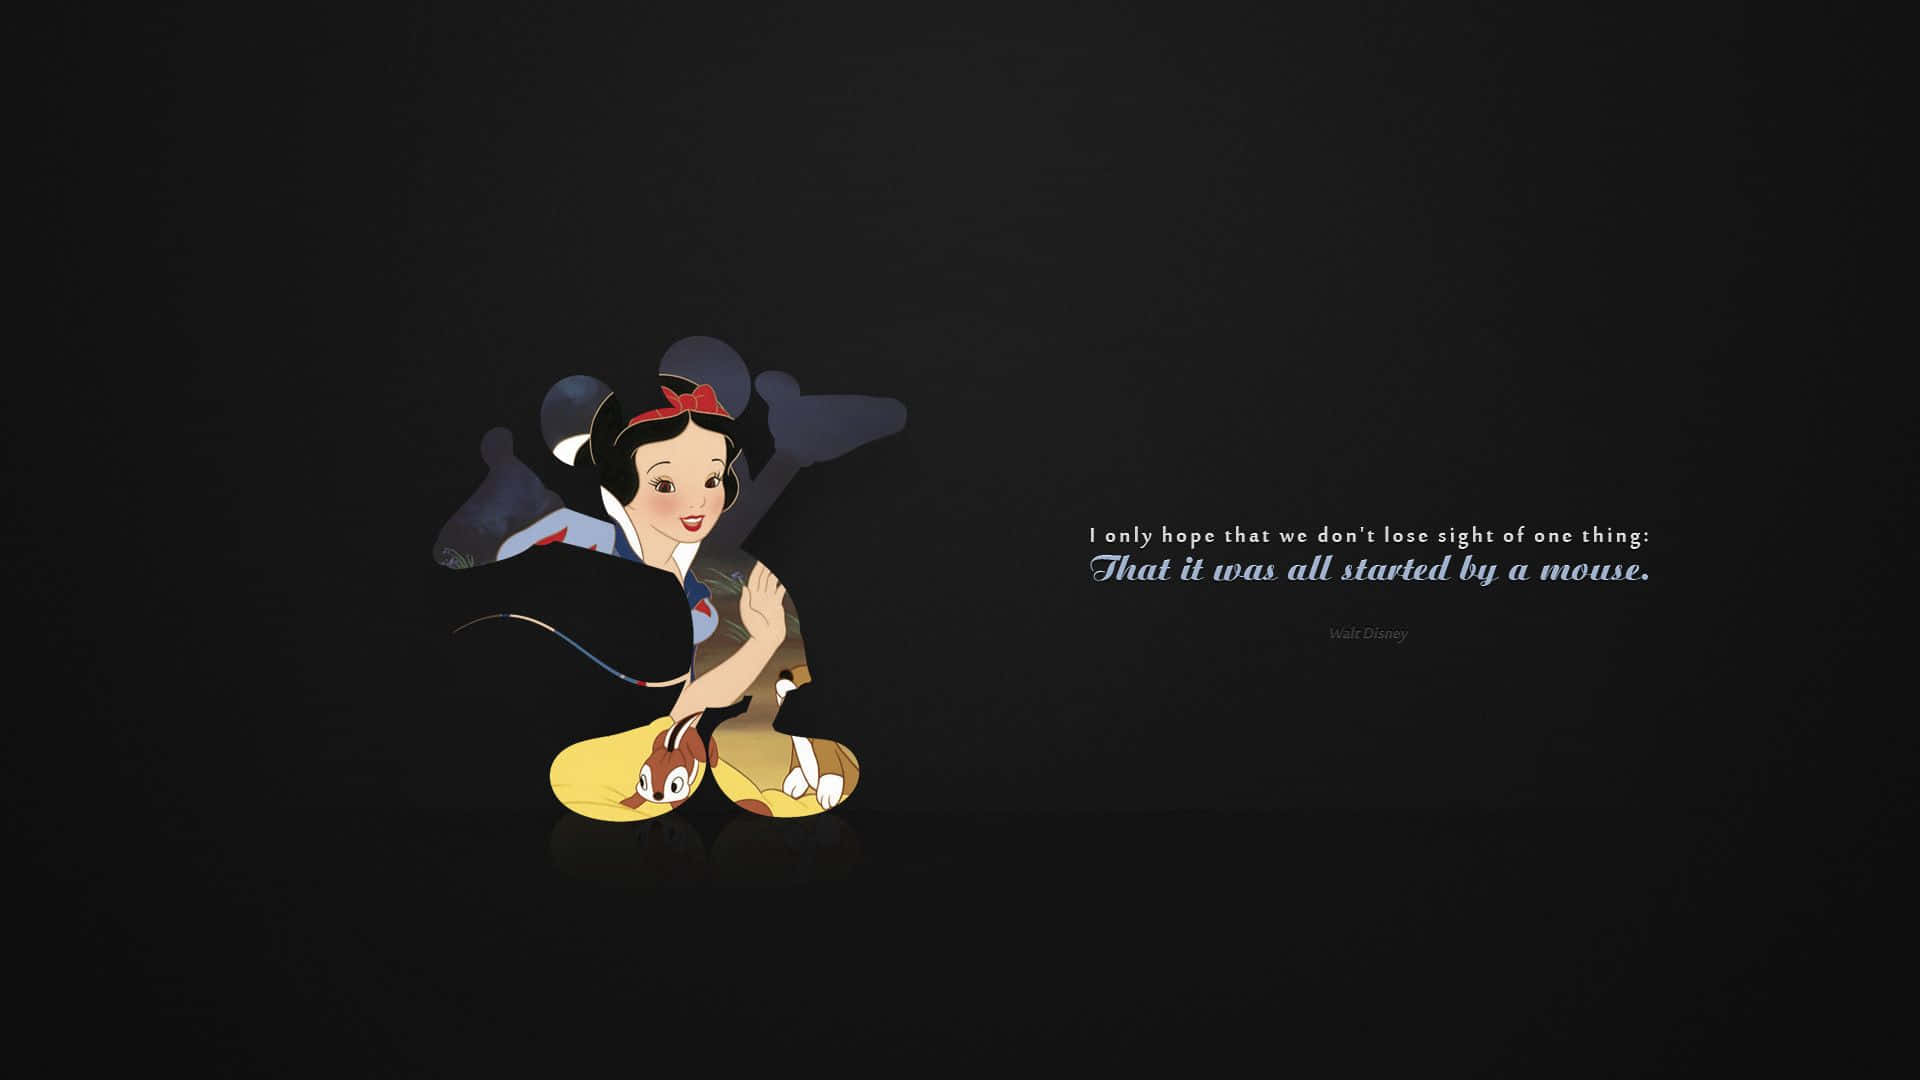 Snow White Mouse Quote Wallpaper